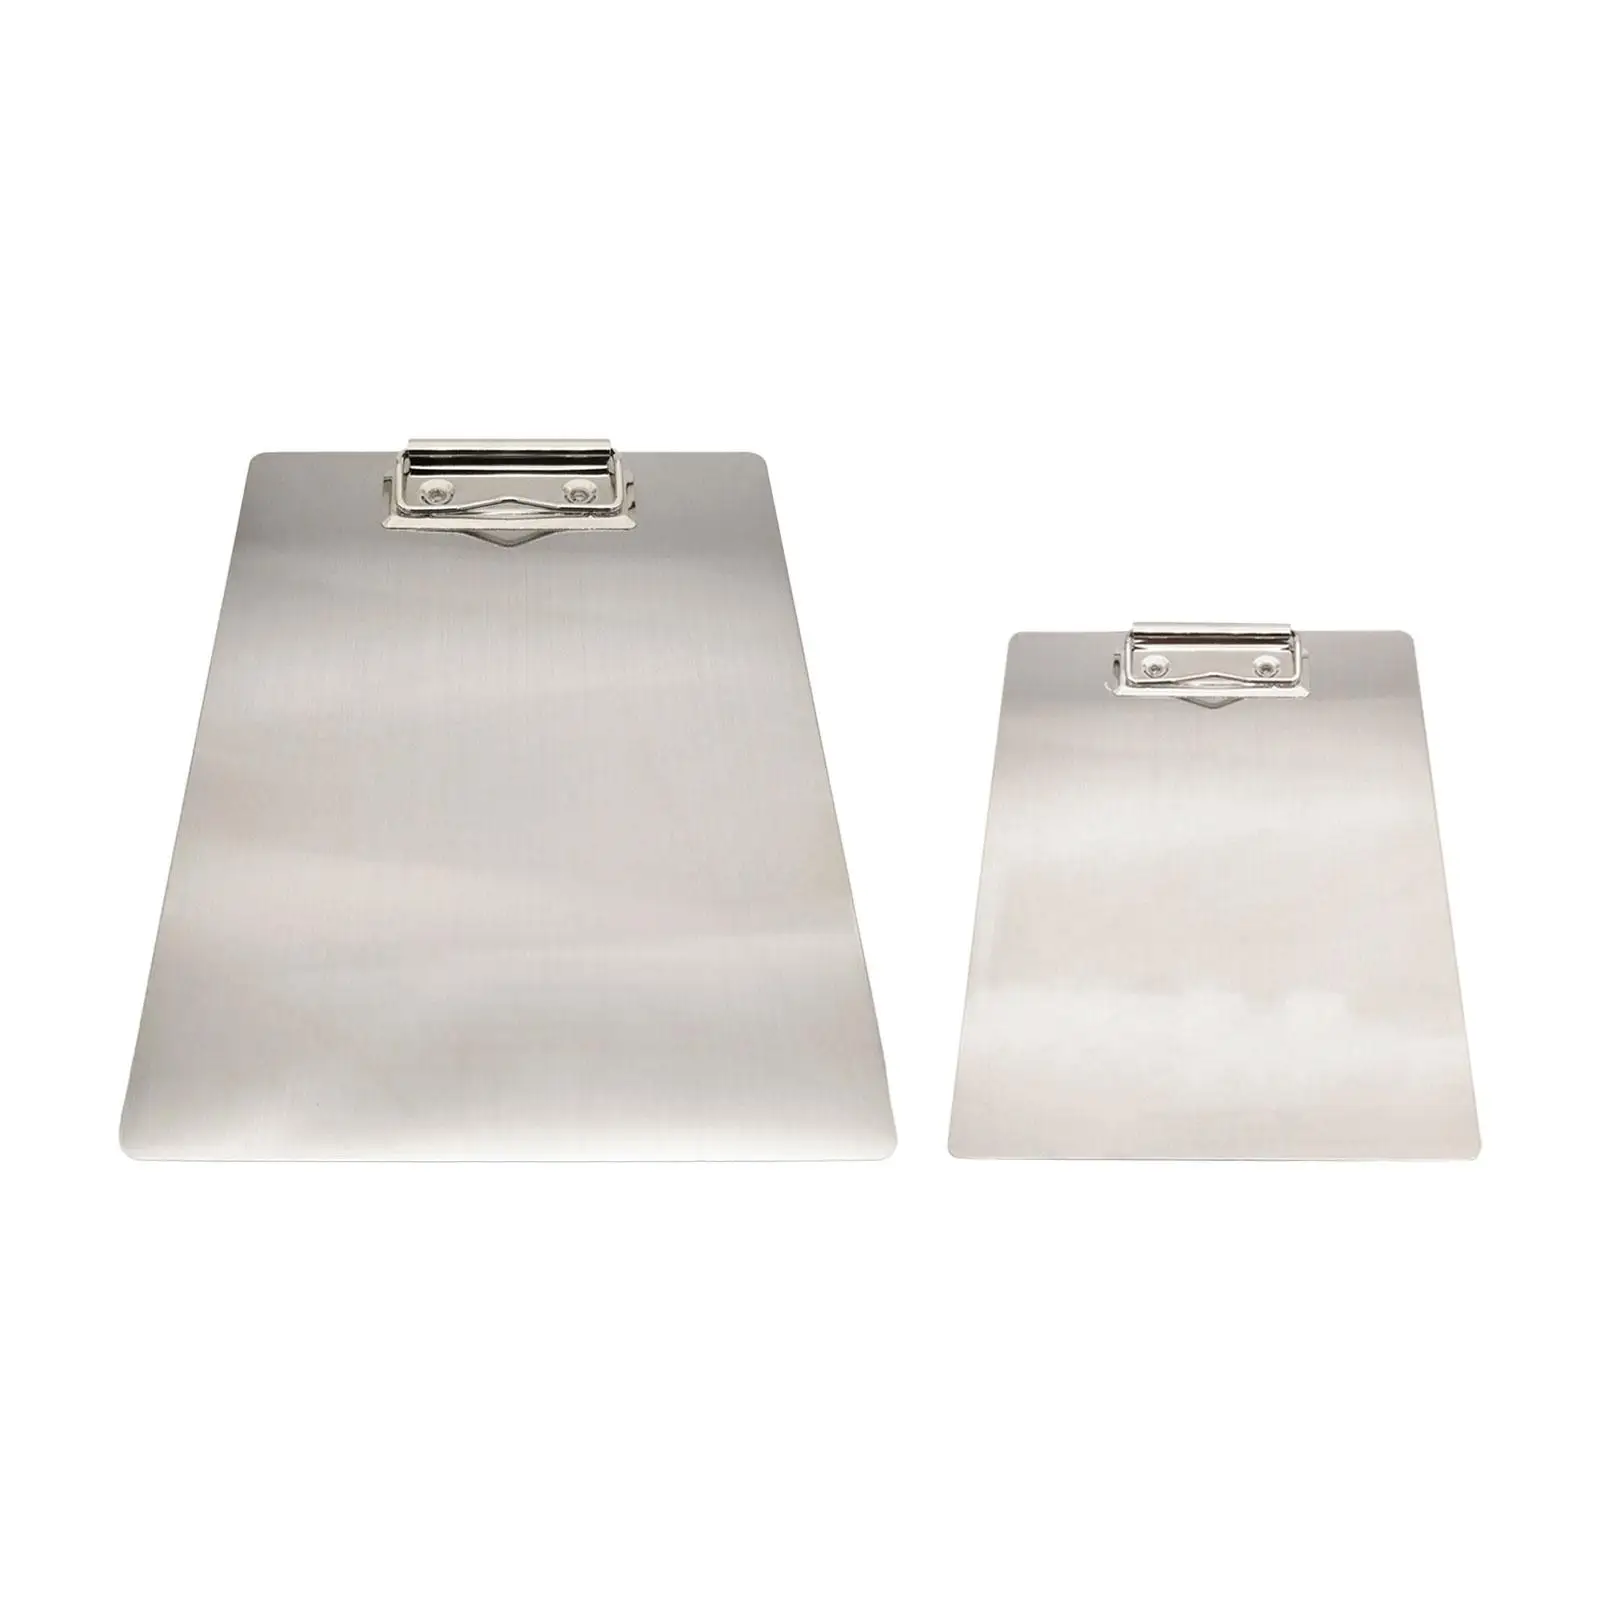 Menu Bill Folder Clipboard Silver Menu Covers Serves Stainless Steel Document Holder for Classroom Drawing Business Forms Notes